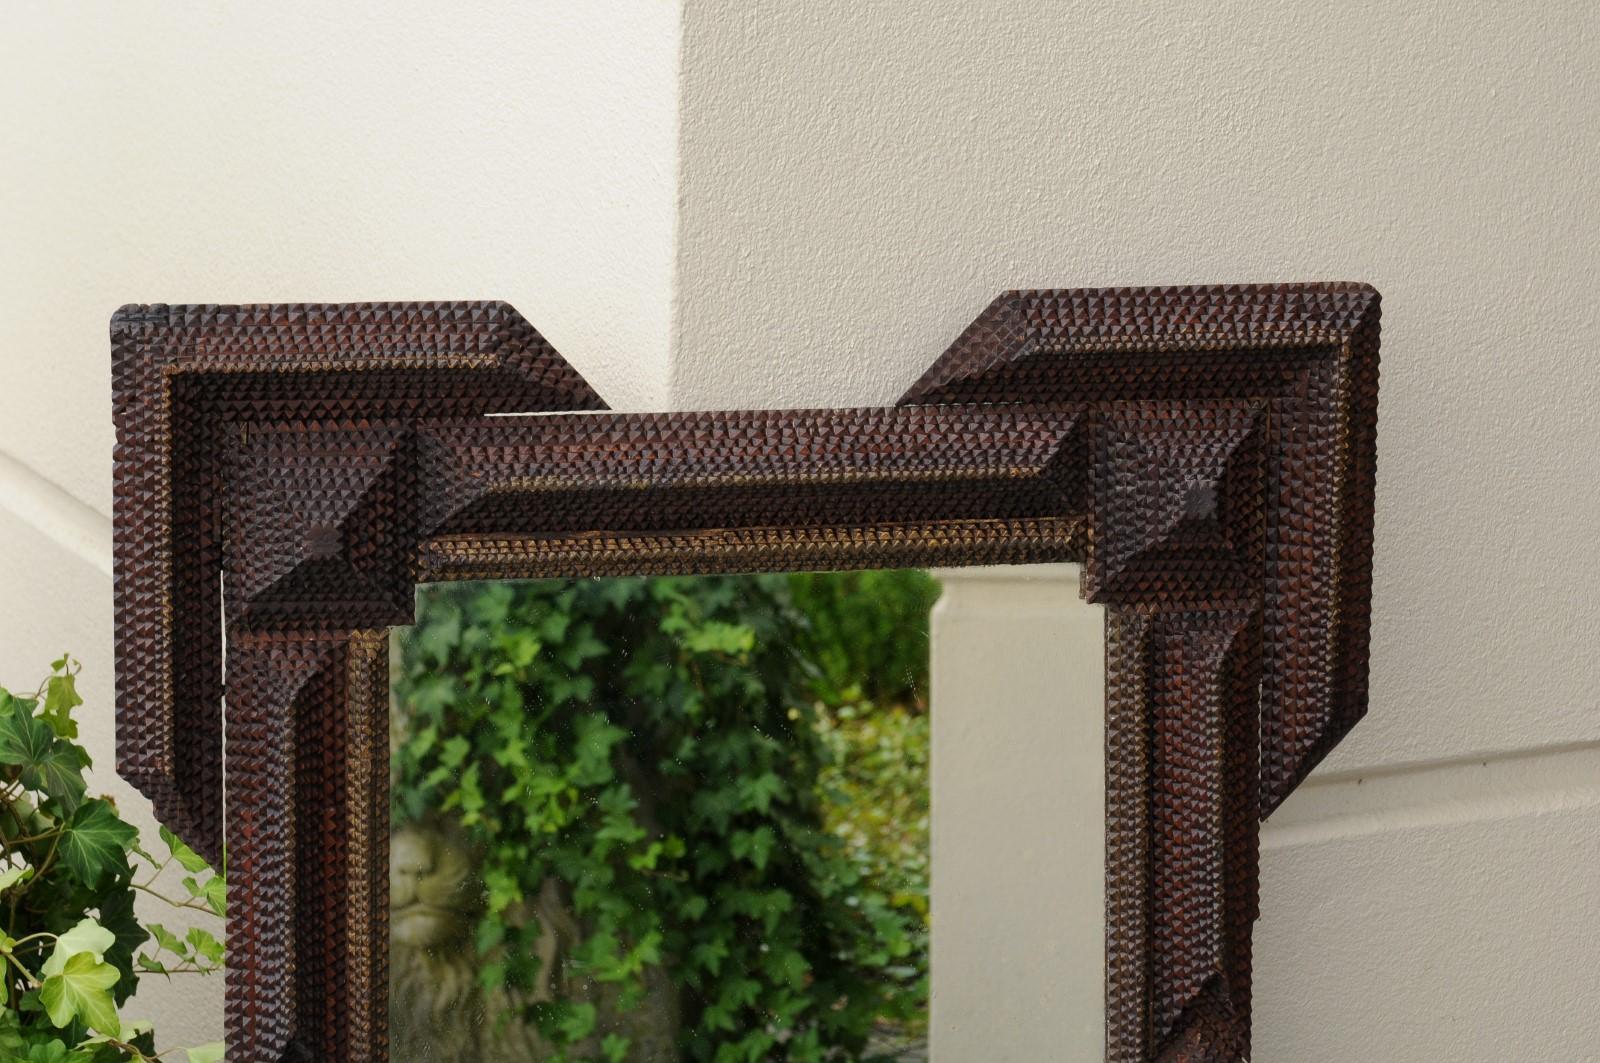 Hand-Carved French Turn of the Century Hand Carved Wood Tramp Art Mirror with Dark Patina